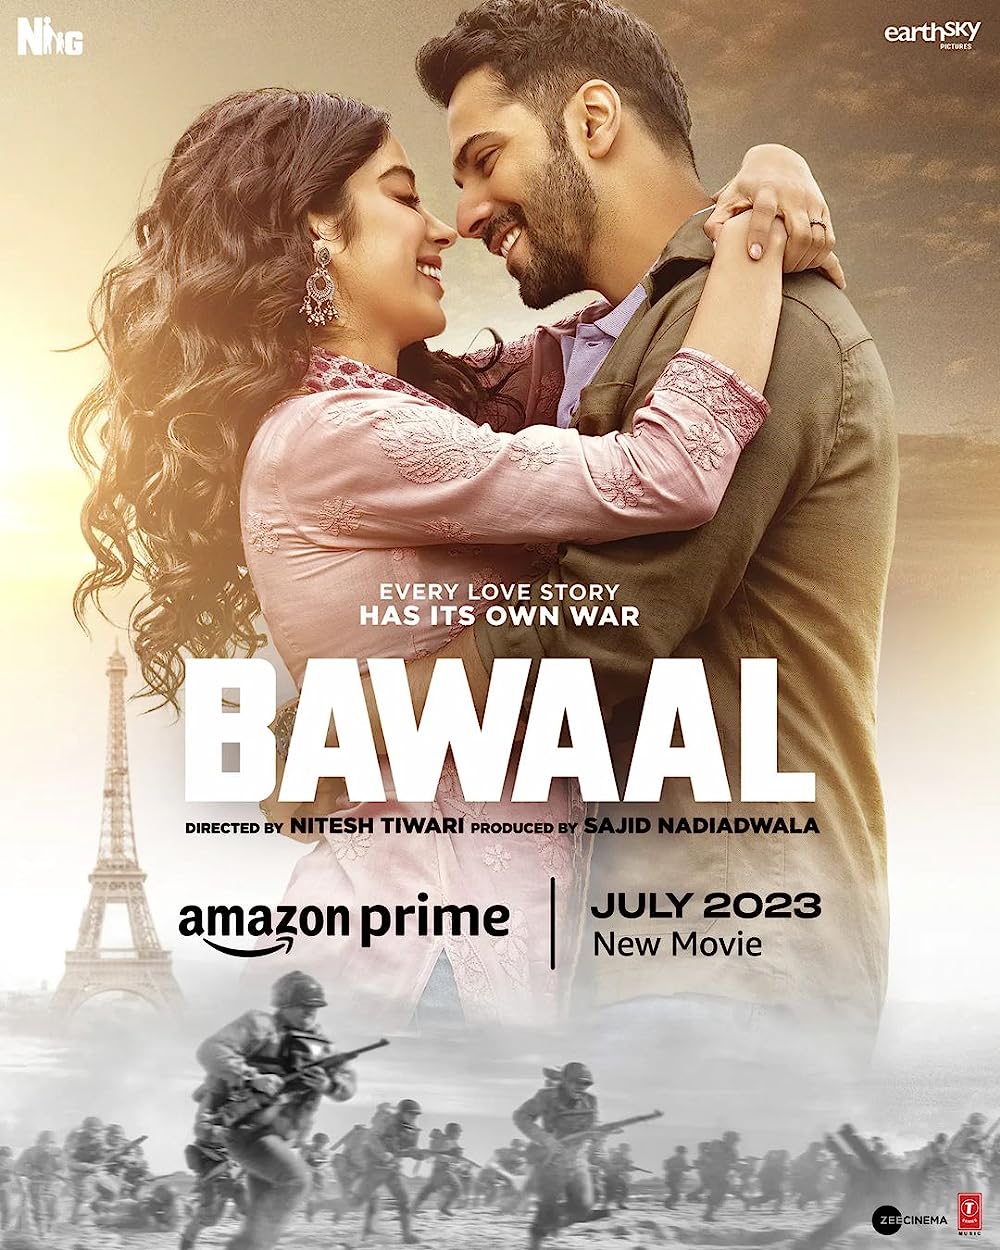 Bawaal (Streaming on JioCinema): Indulge in this heartwarming romantic drama that follows small-town history teacher Ajay Dixit (Varun Dhawan) and his whirlwind journey with the beautiful Nisha (Janhvi Kapoor).